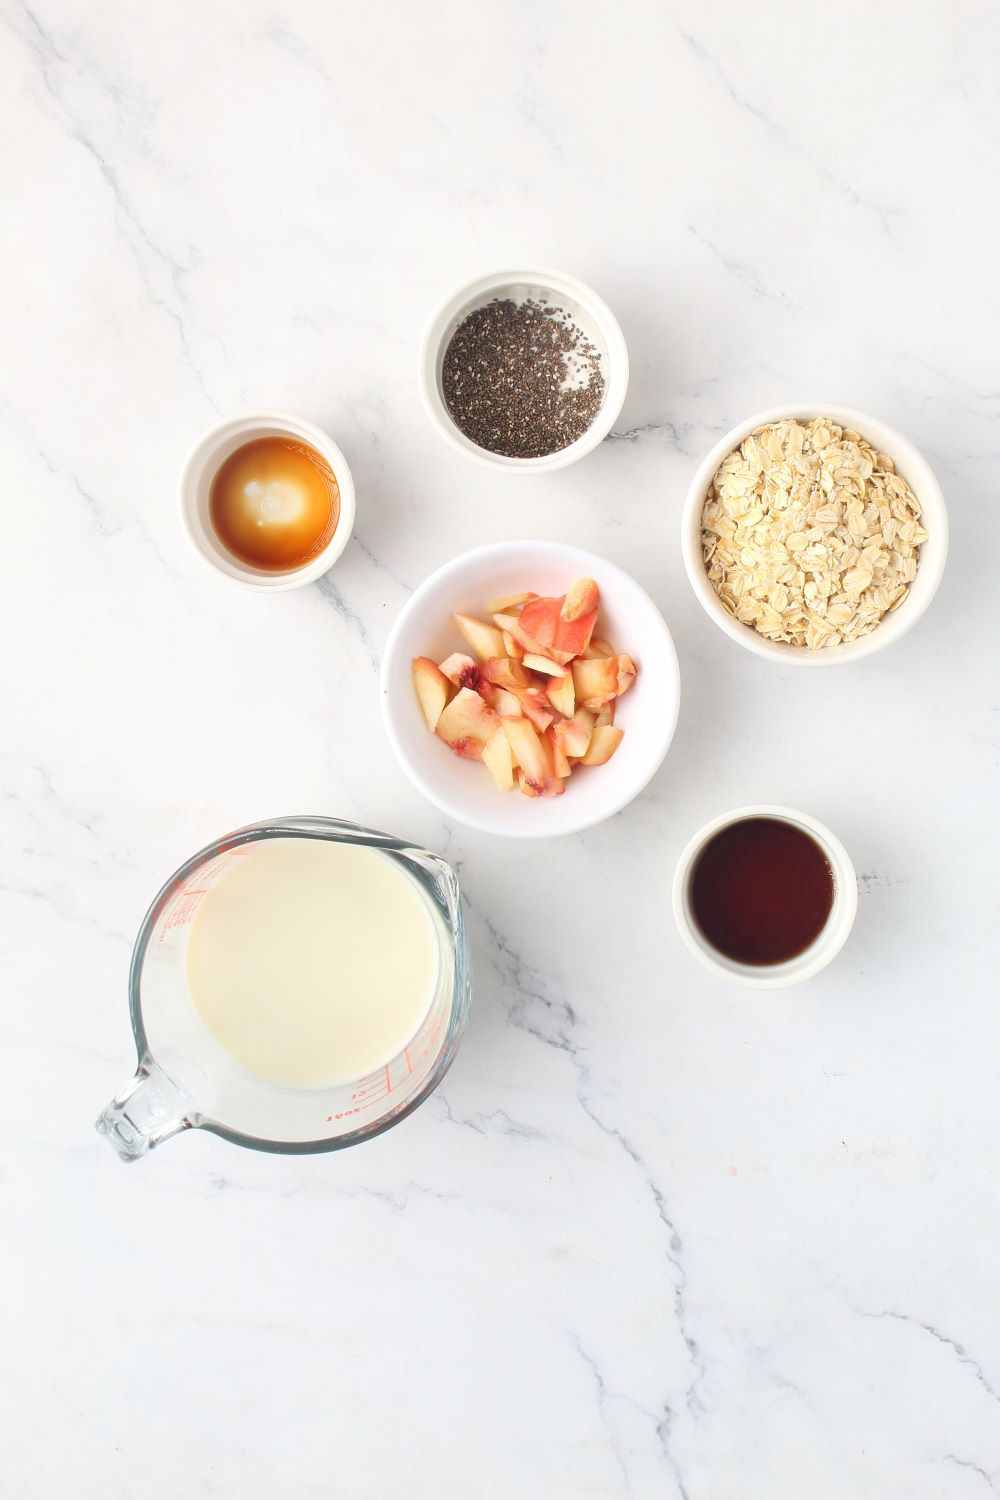 Ingredients for Peach Overnight Oats